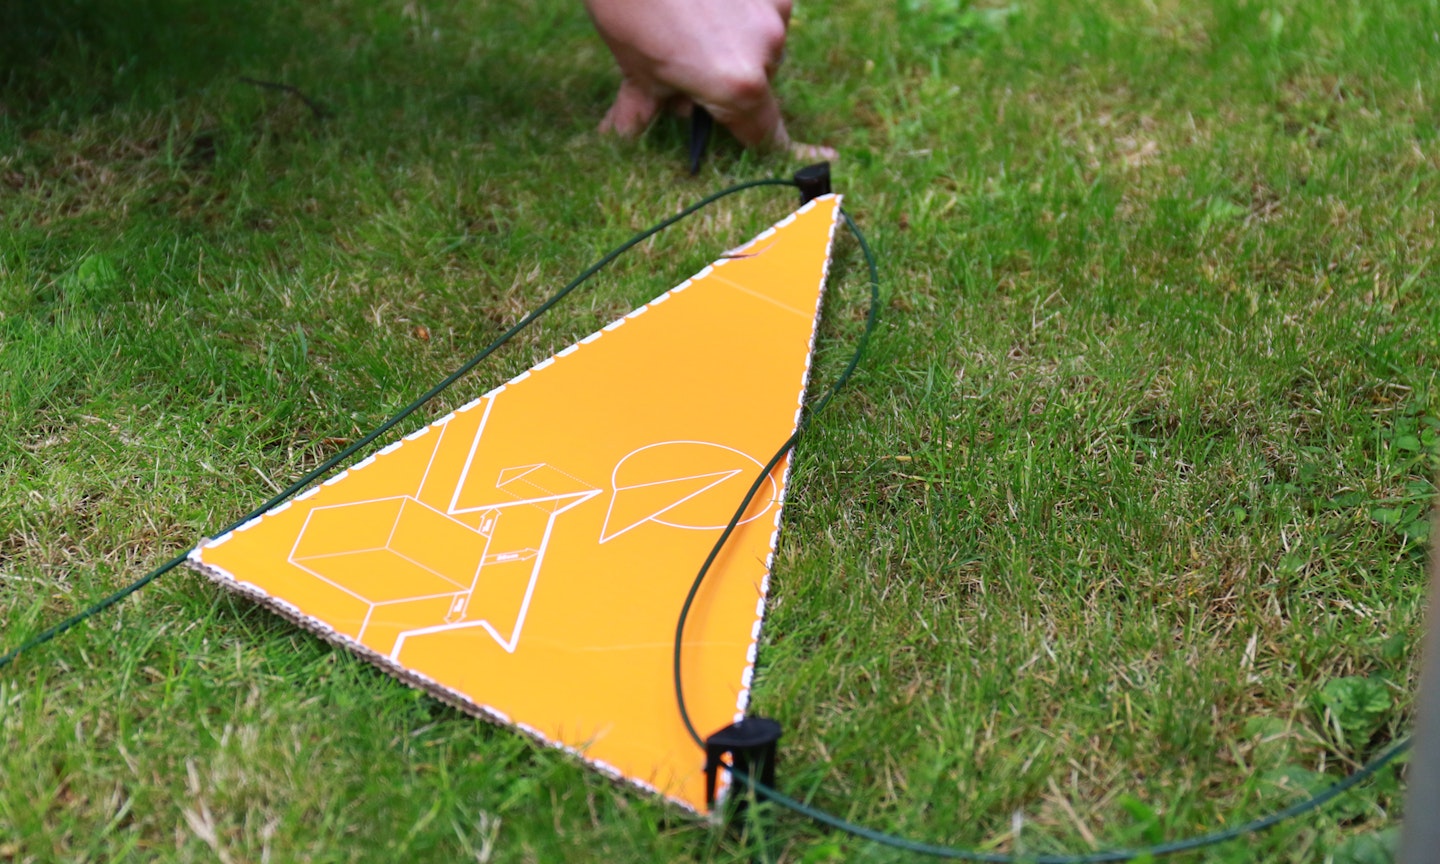 Worx Landroid M500 robotic lawnmower triangle guide